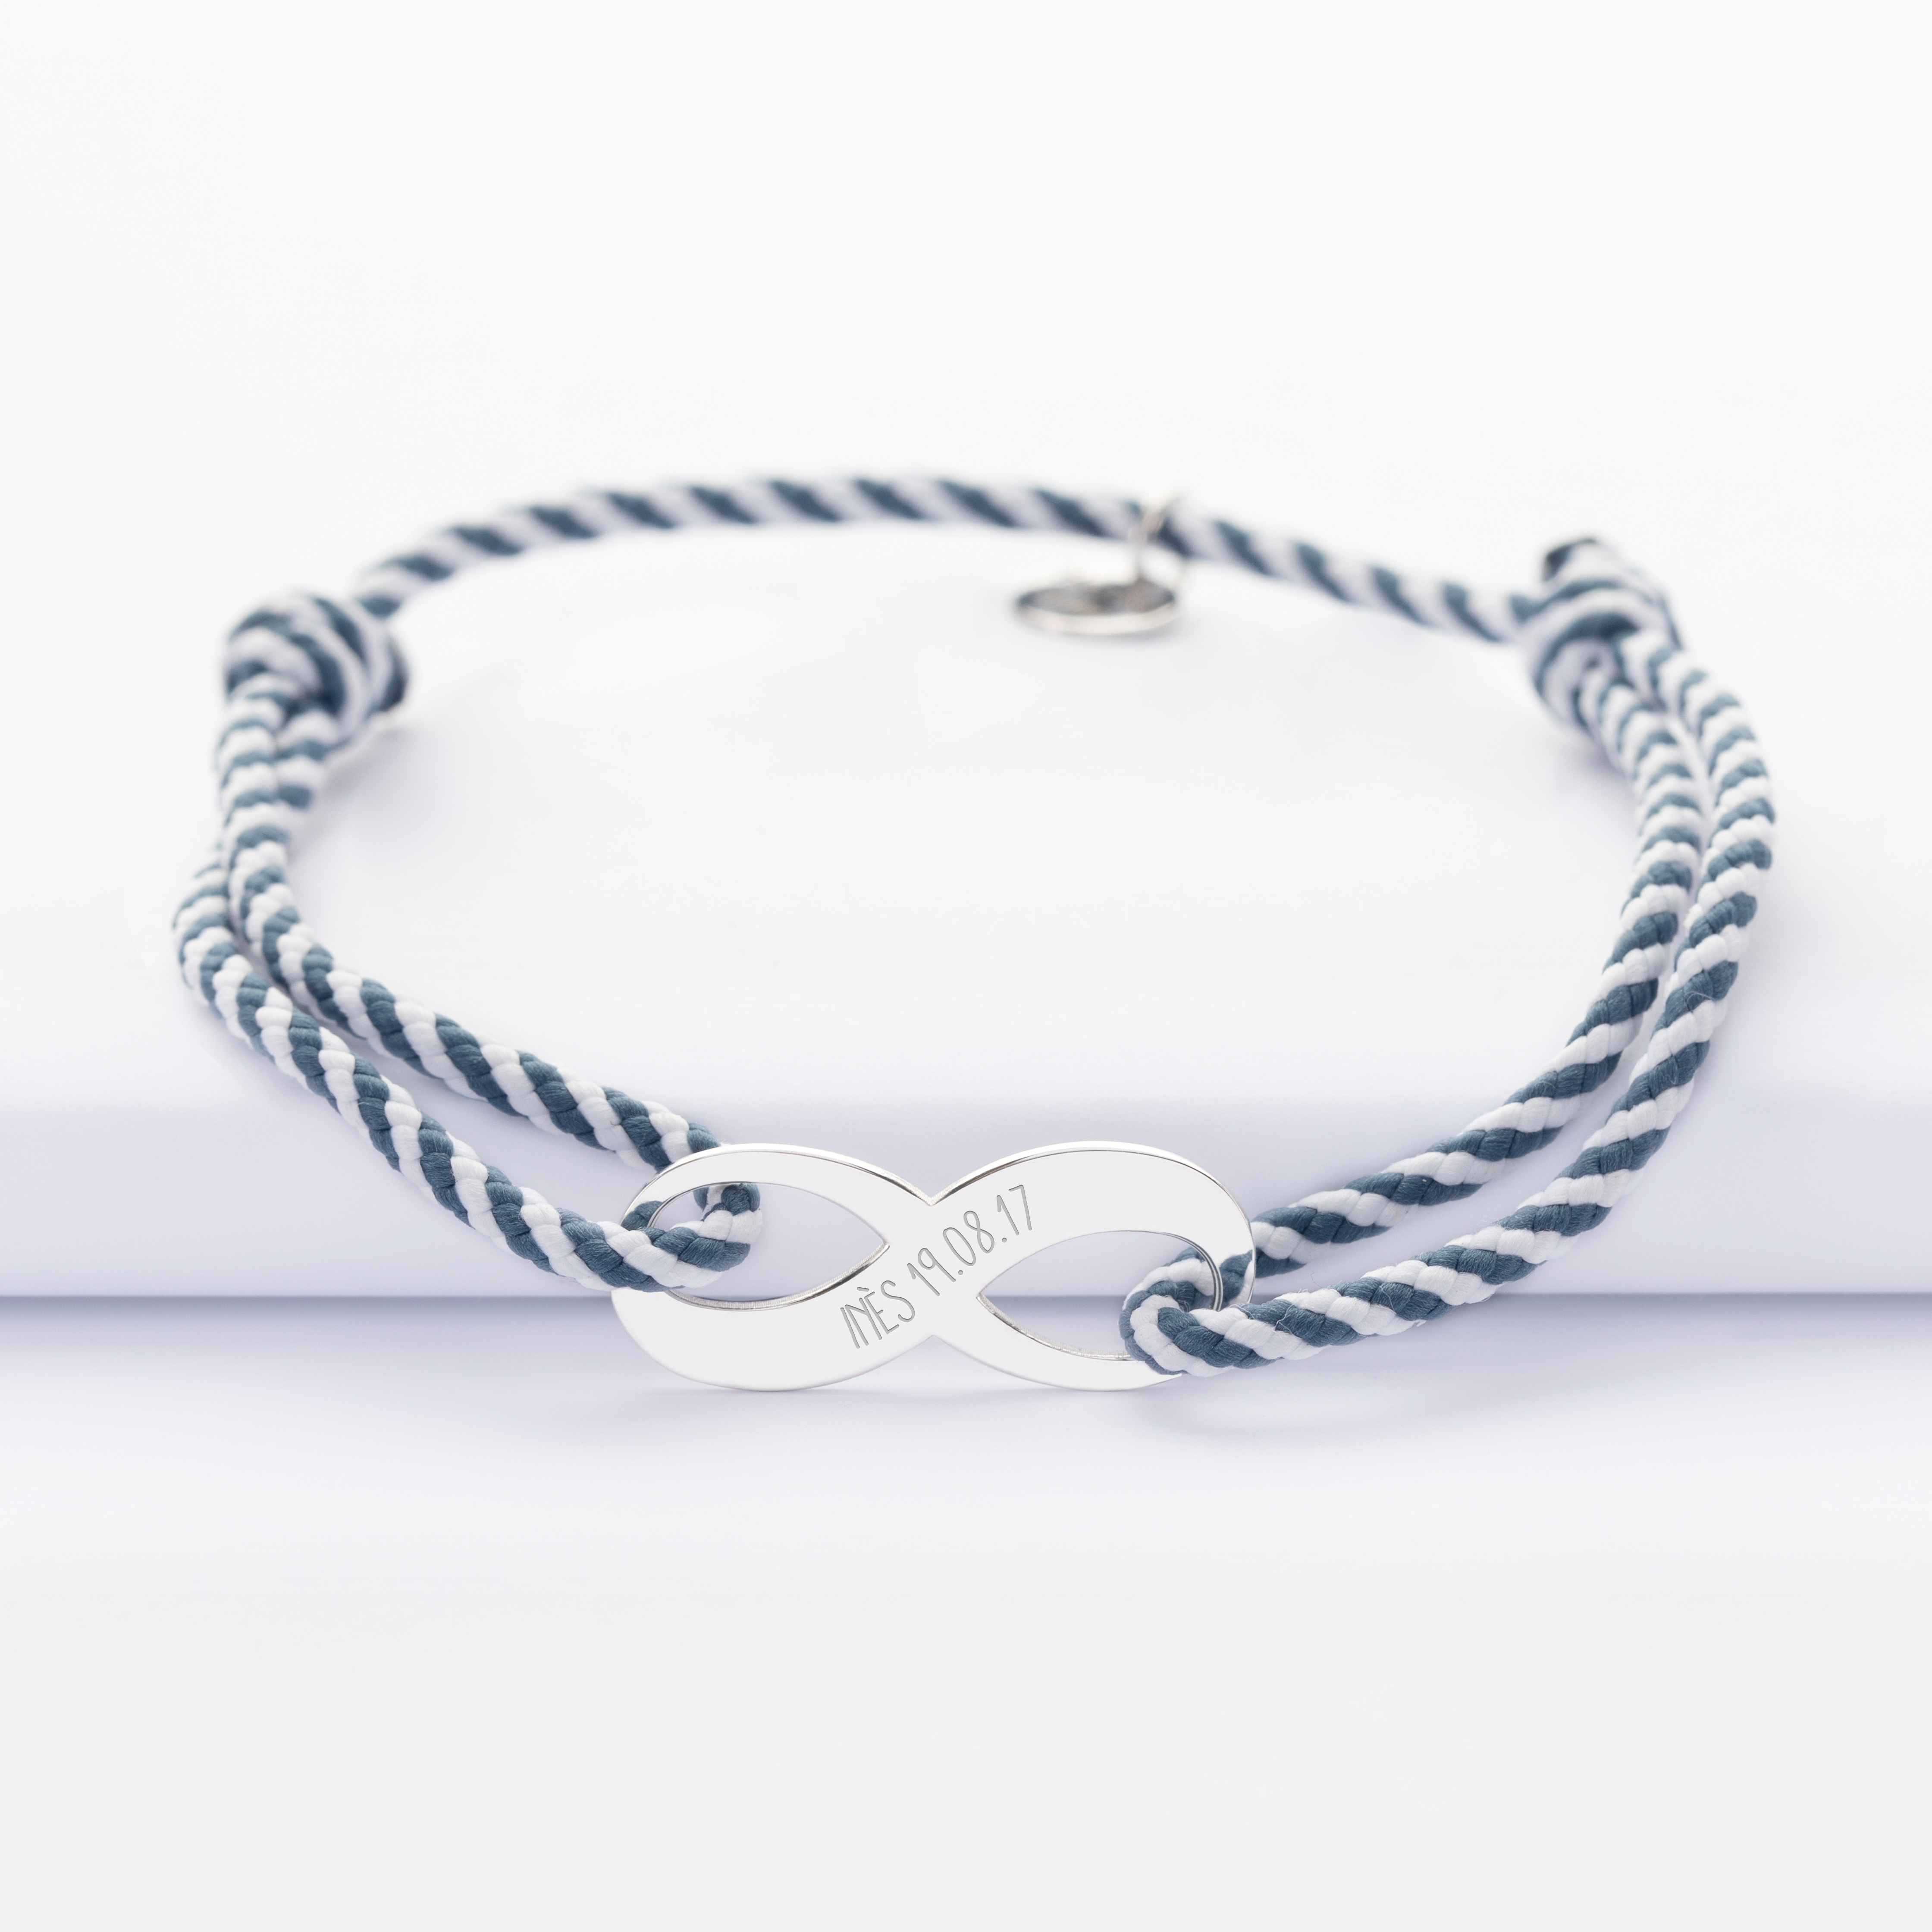 Men's bracelet braided cord with engraved silver medal 25x10mm